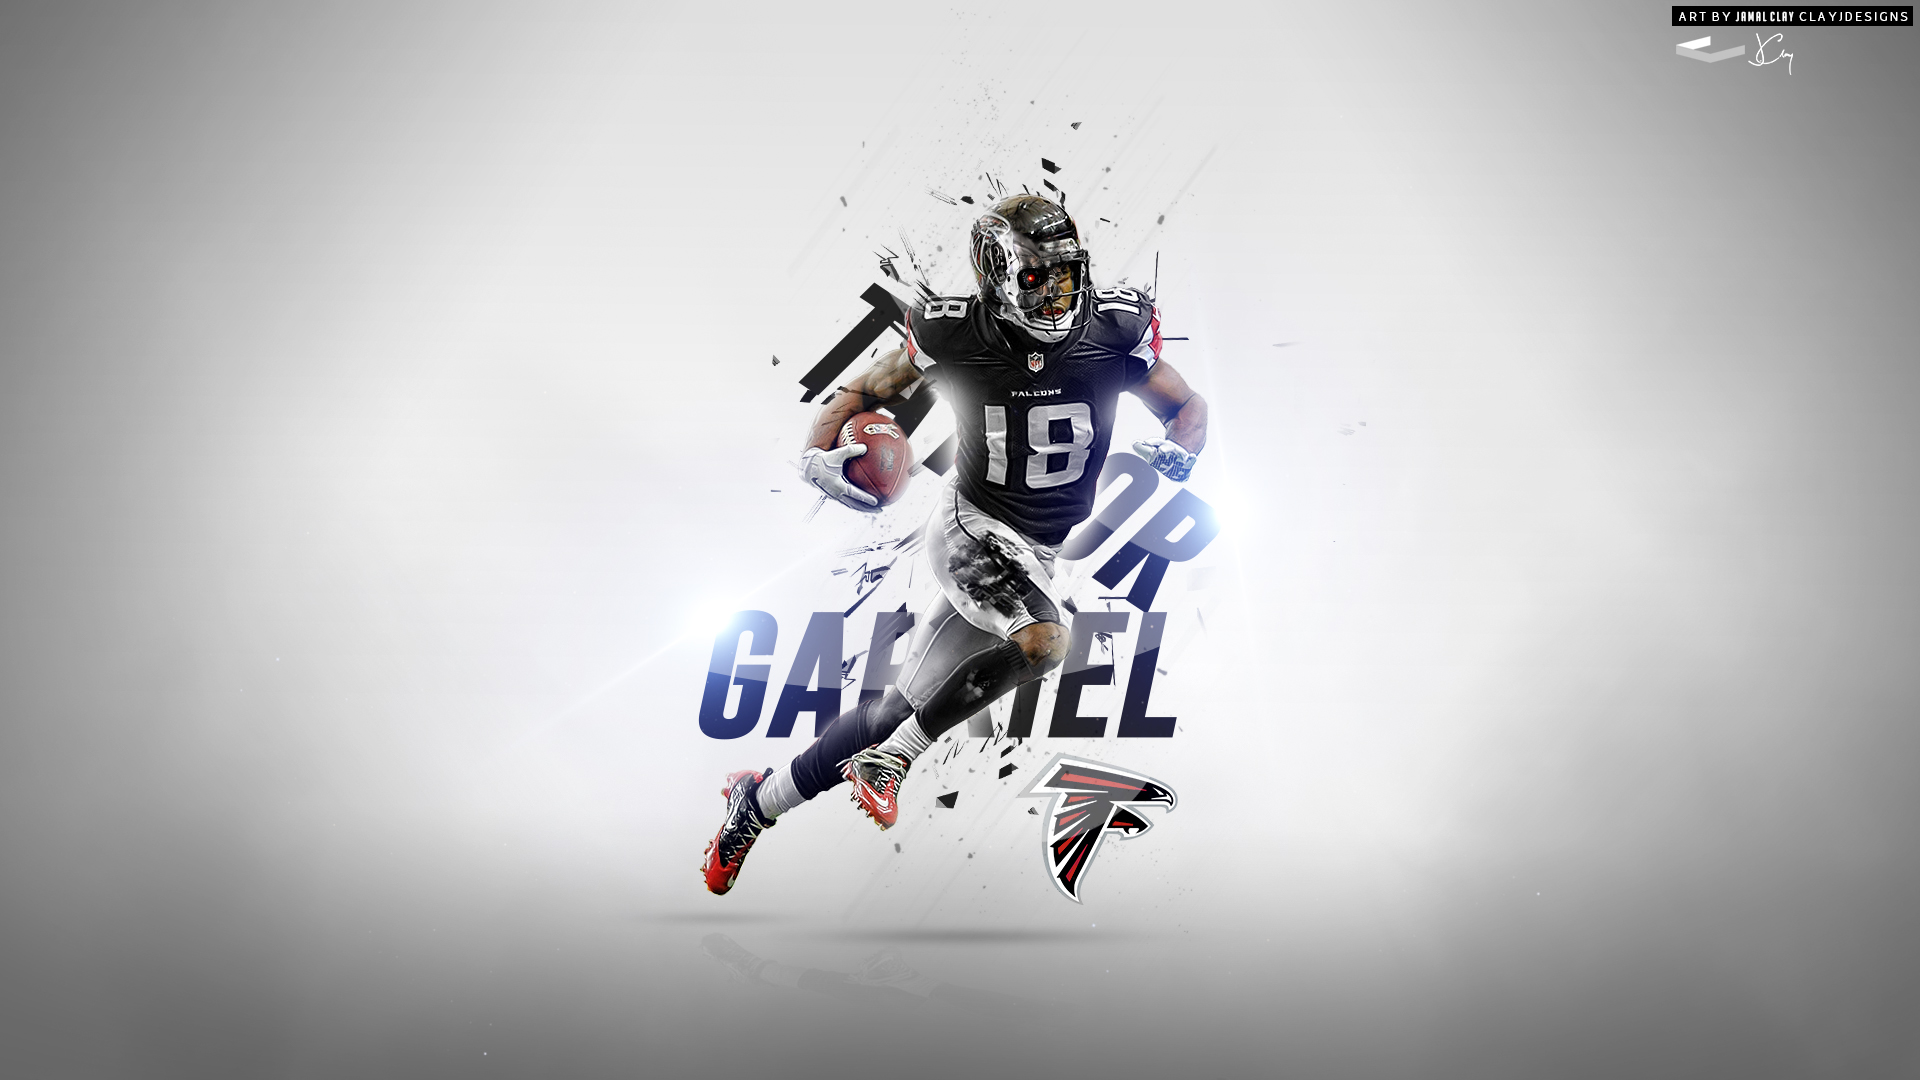 Sports Graphics - clayjdesigns